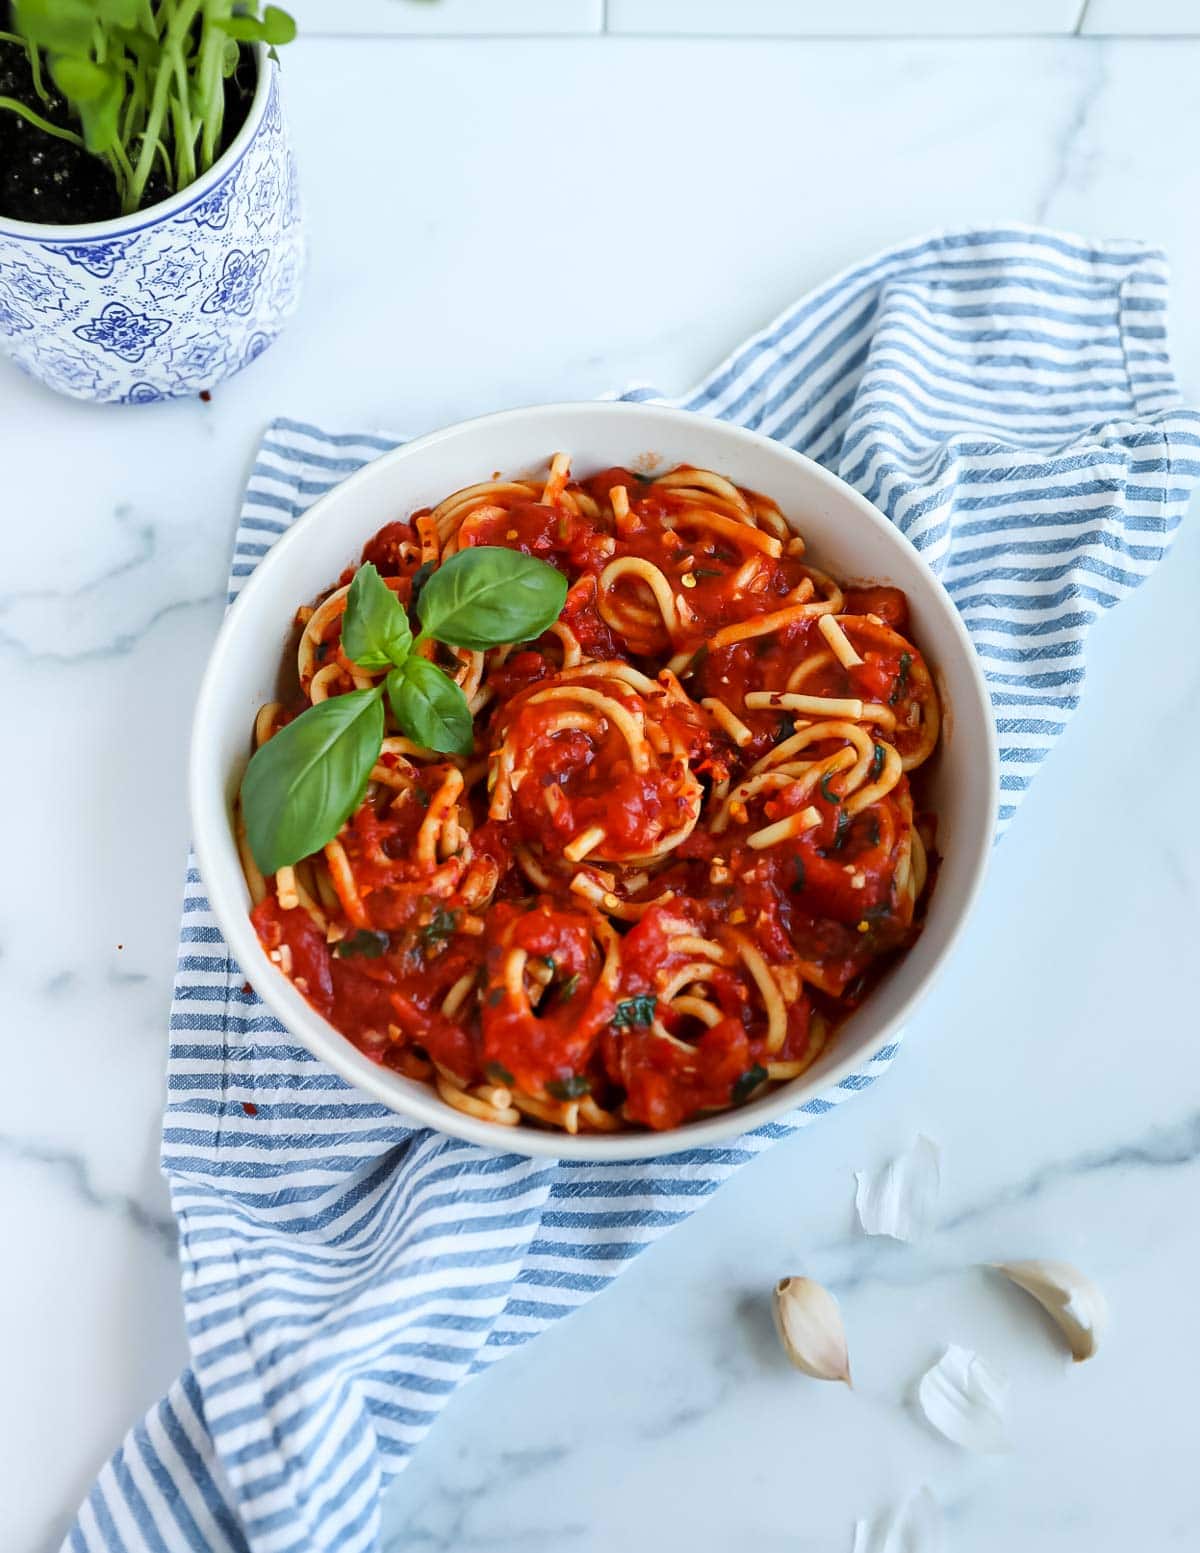 Red sauce covering spaghetti in a white bowl. The spaghetti is garnished with fresh green basil